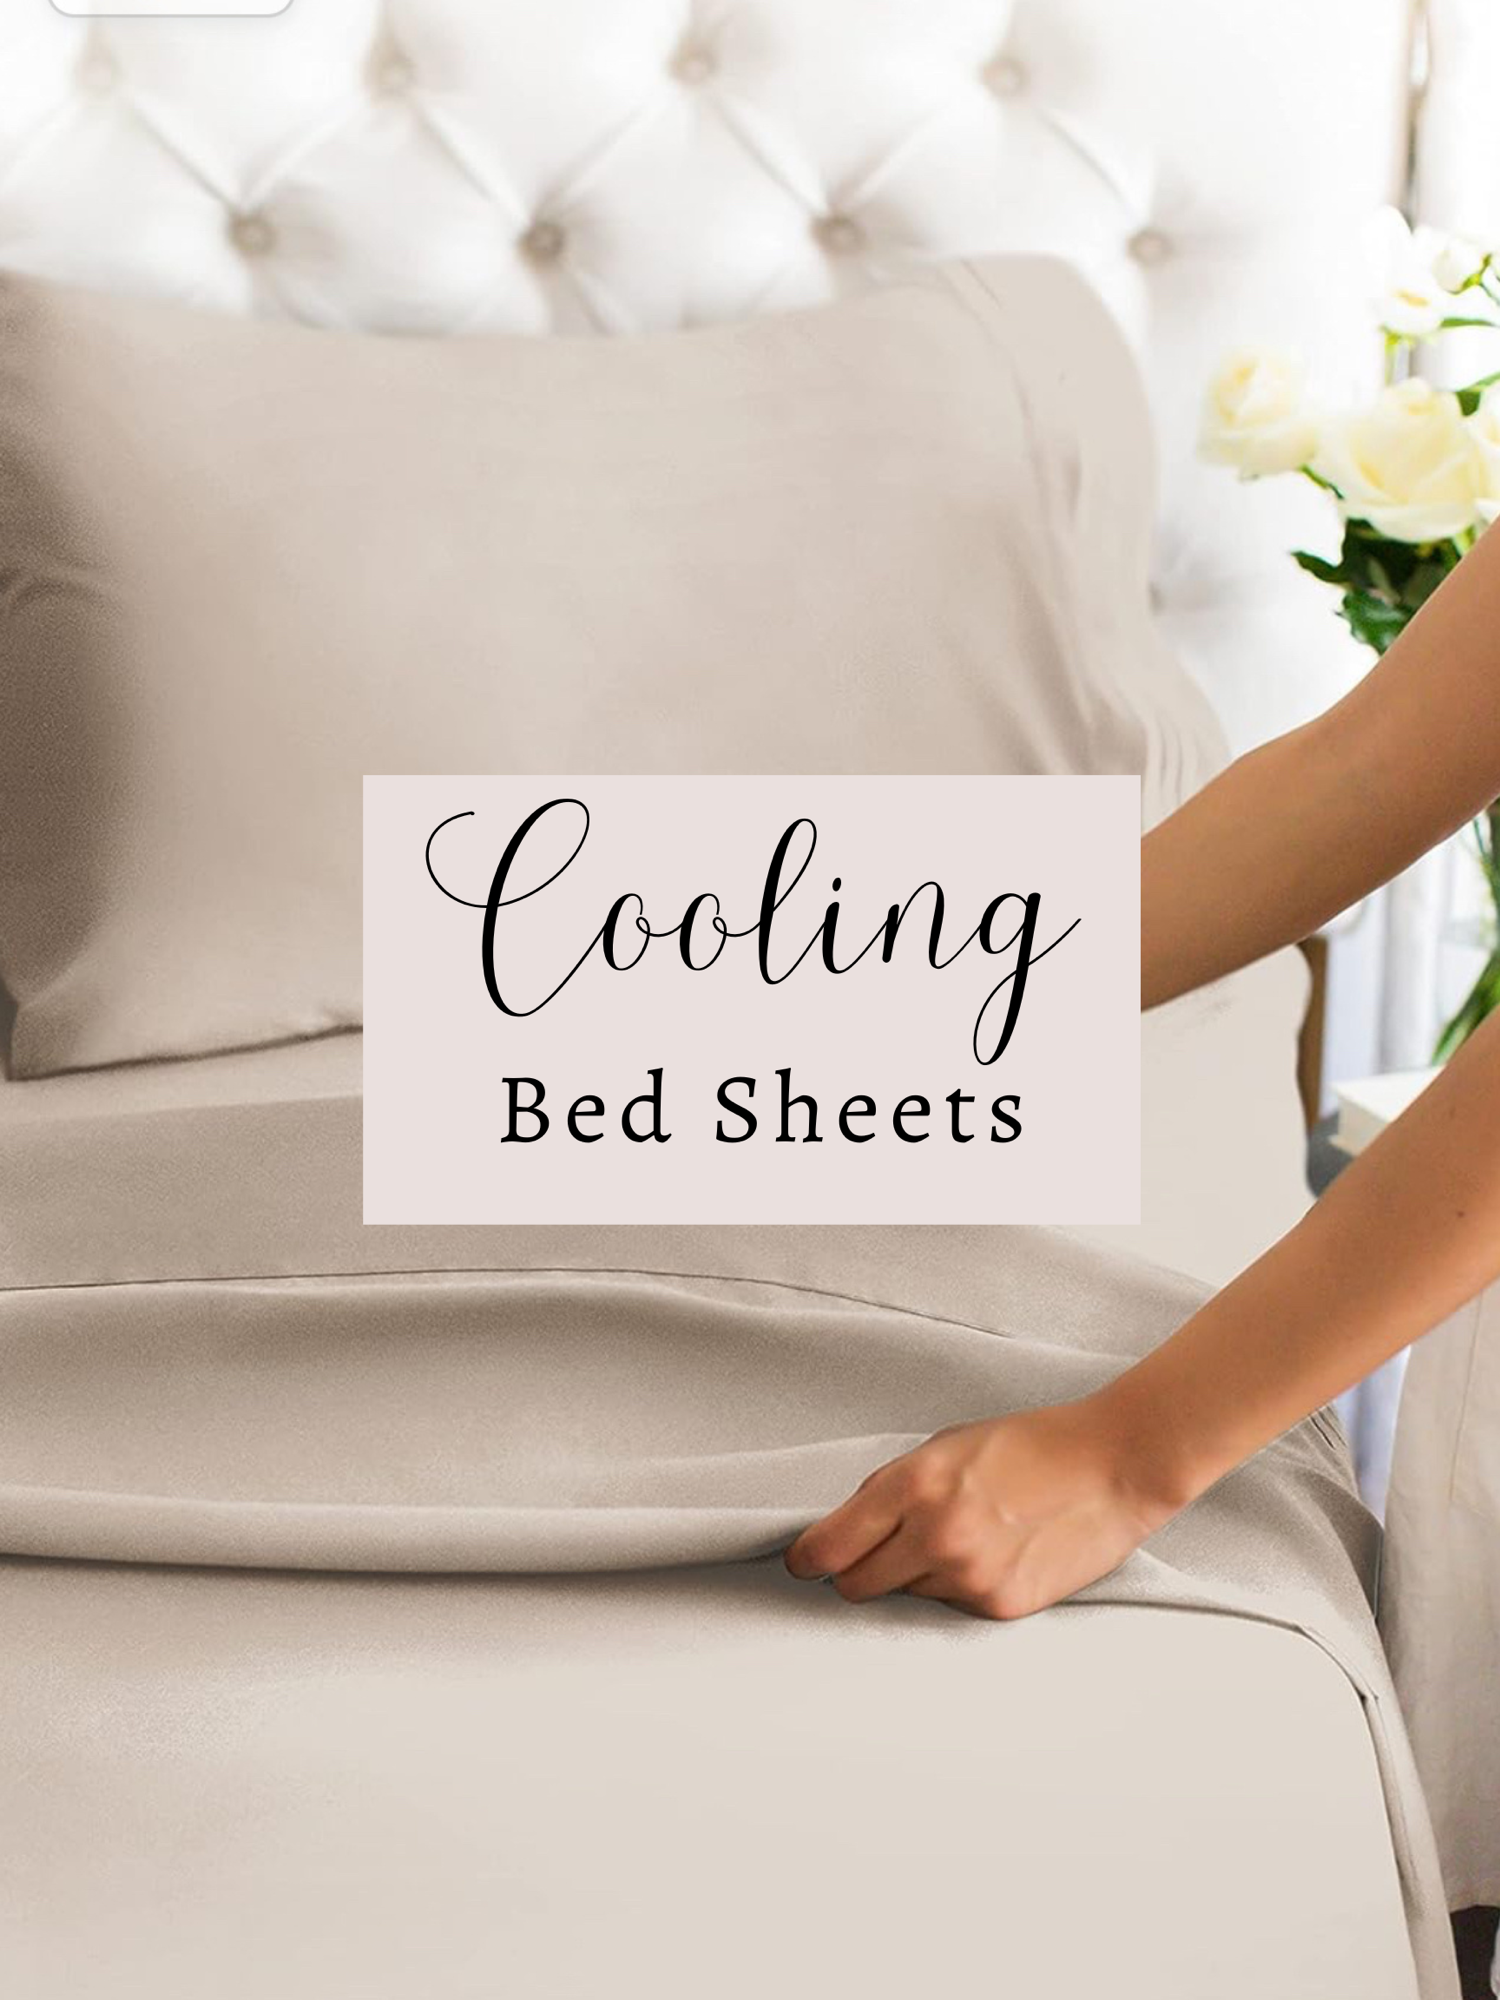 Night Sweats: Cooling Bed Sheets & Other Amazon Items to Combat Menopause